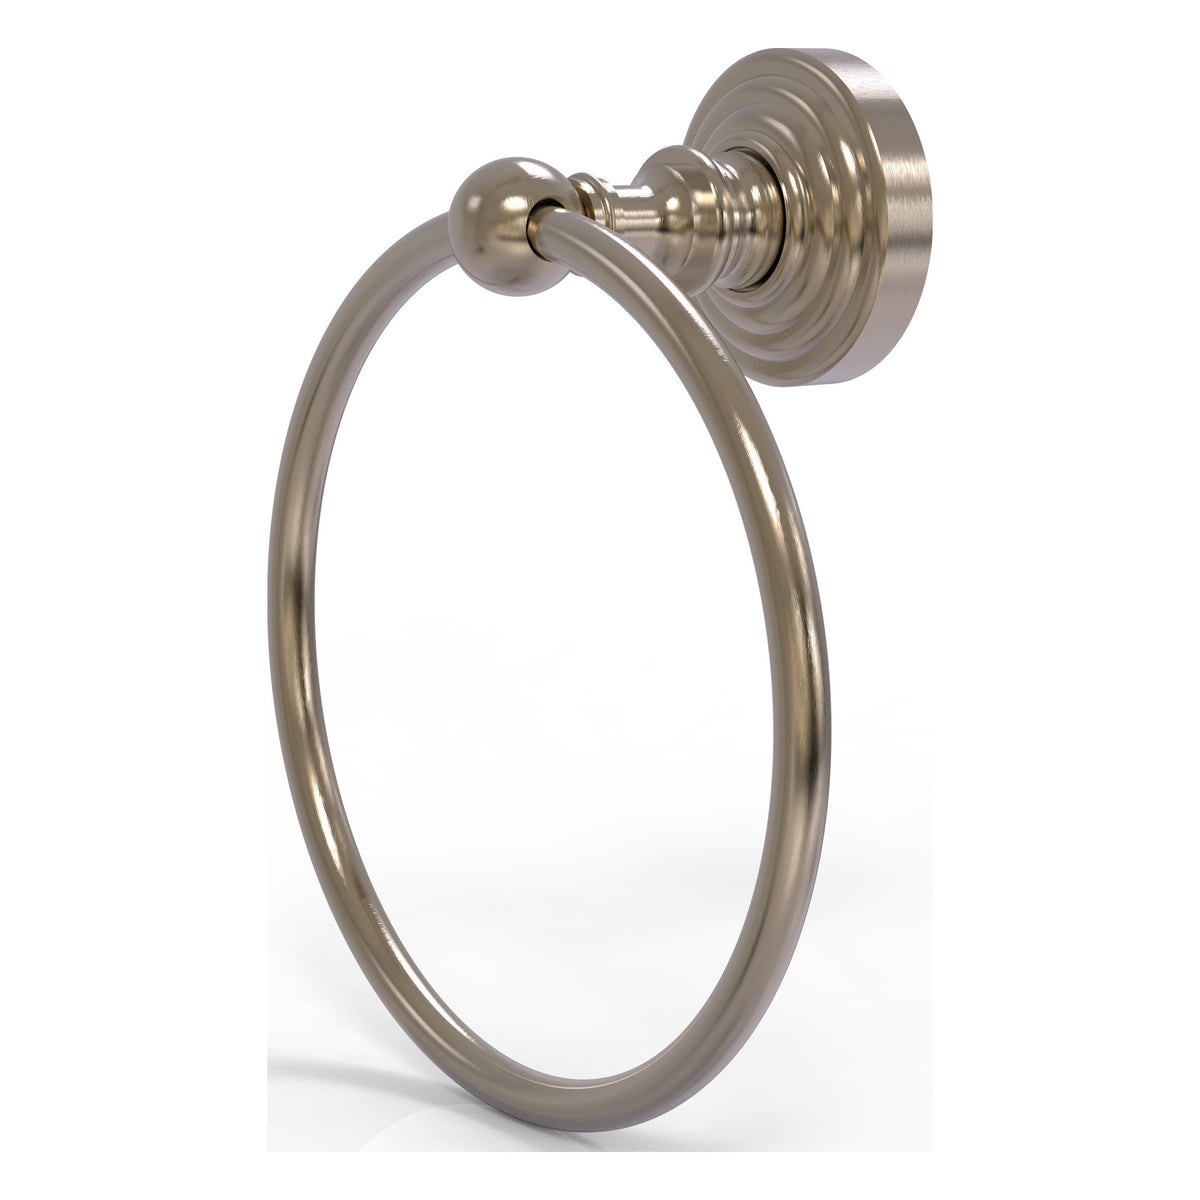 Brass towel ring with Antique Pewter finish